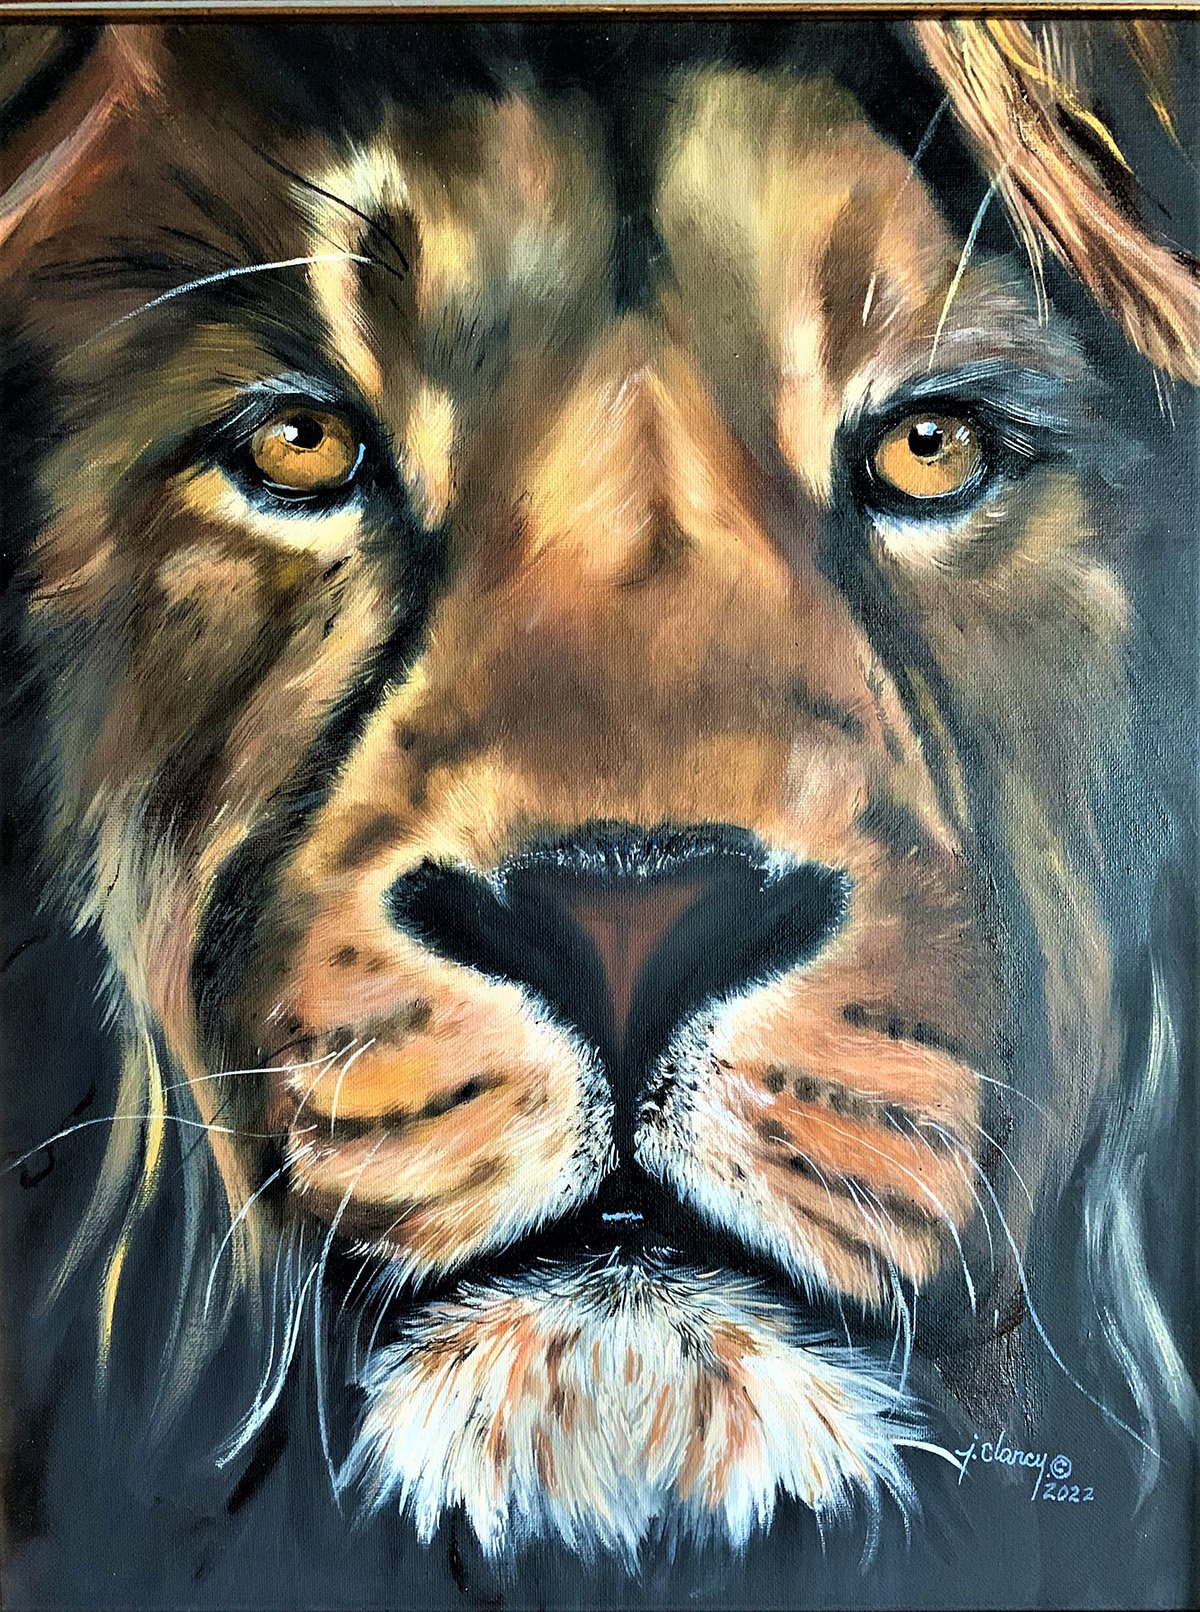 Lion © 2022 Jody Goldman. All Rights Reserved.